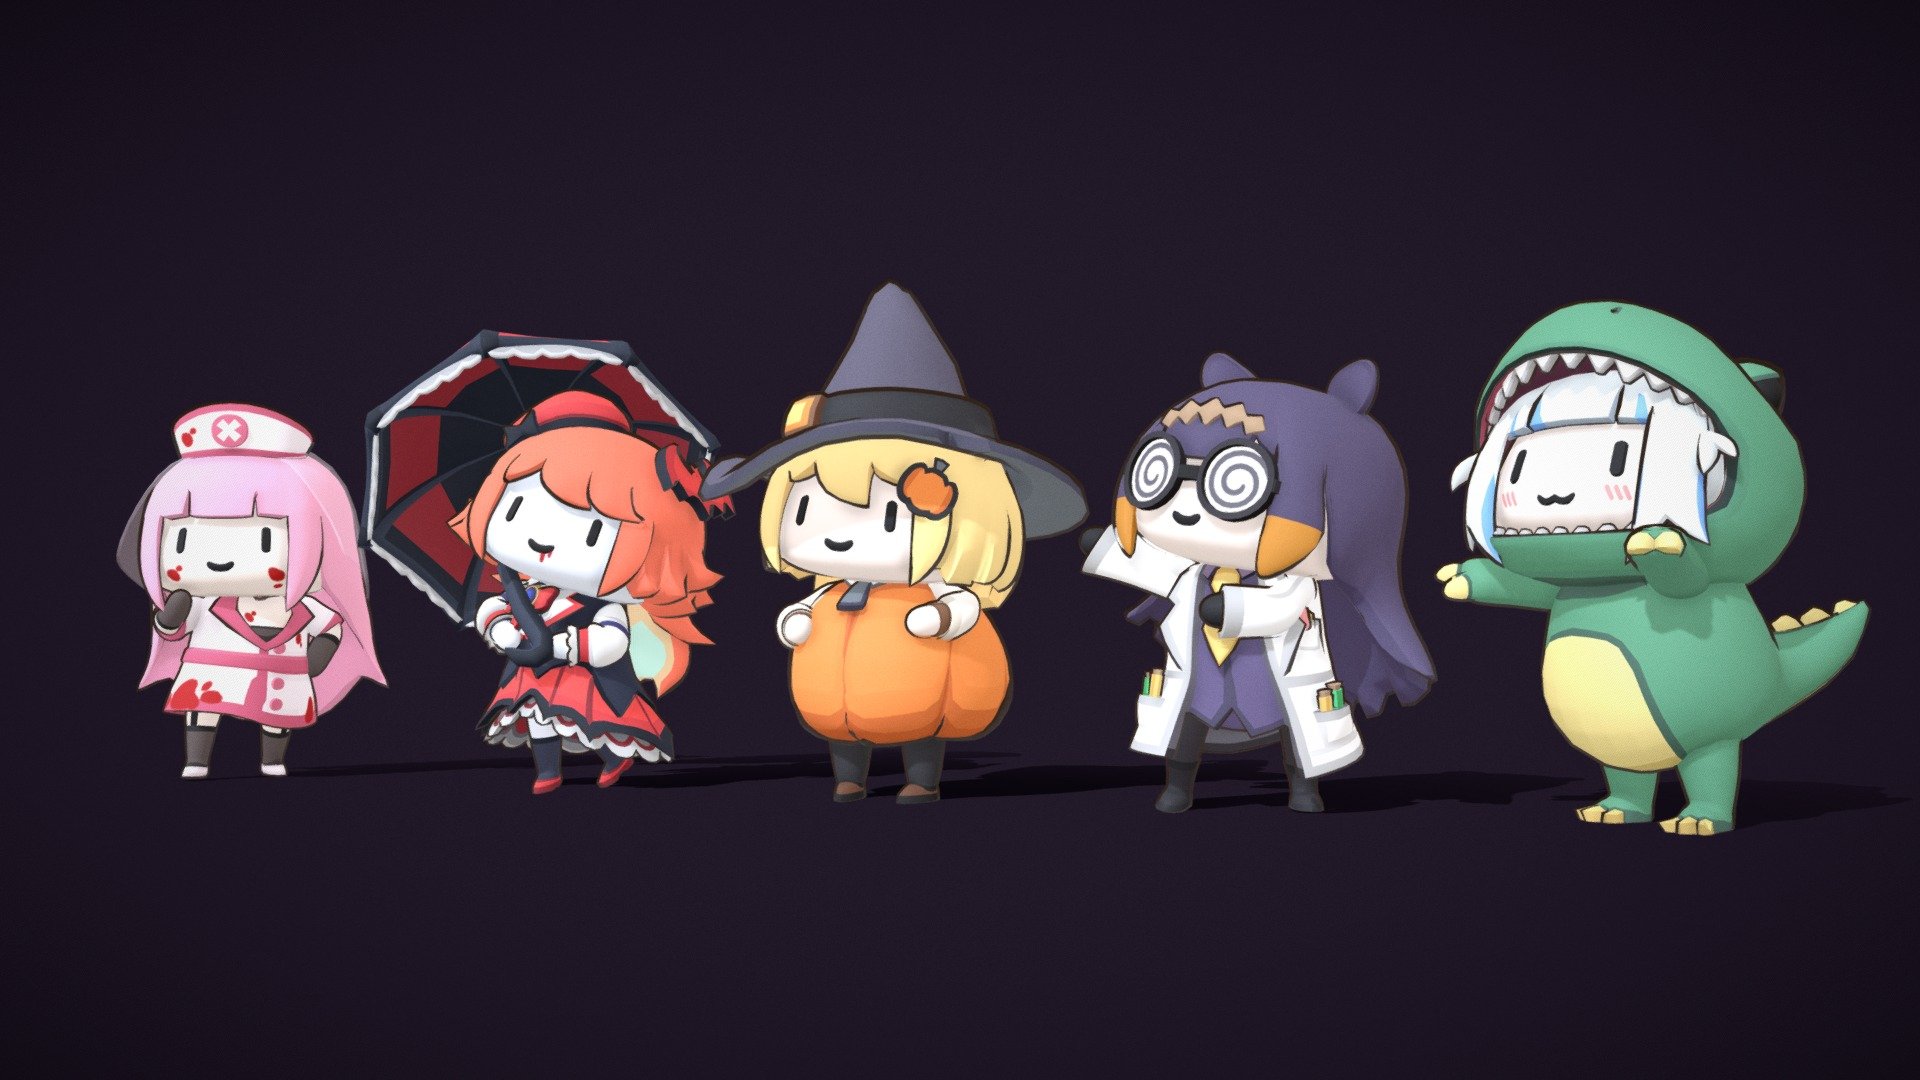 These are Halloween costumes that were commissioned for the vtuber talents of Hololive English Myth. These were used as their avatars in their VR Chat halloween event!  Amelia asked me to share these publically, despite these being a commission, so here you go!

I approve of anyone using these models to make animations, fan-games, port them to other programs, create mods, share them onward, etc. As long as you are considerate of the talents who used these to represent themselves, and make sure the usage of these stays within Hololive Fan Work Guidelines 3d model